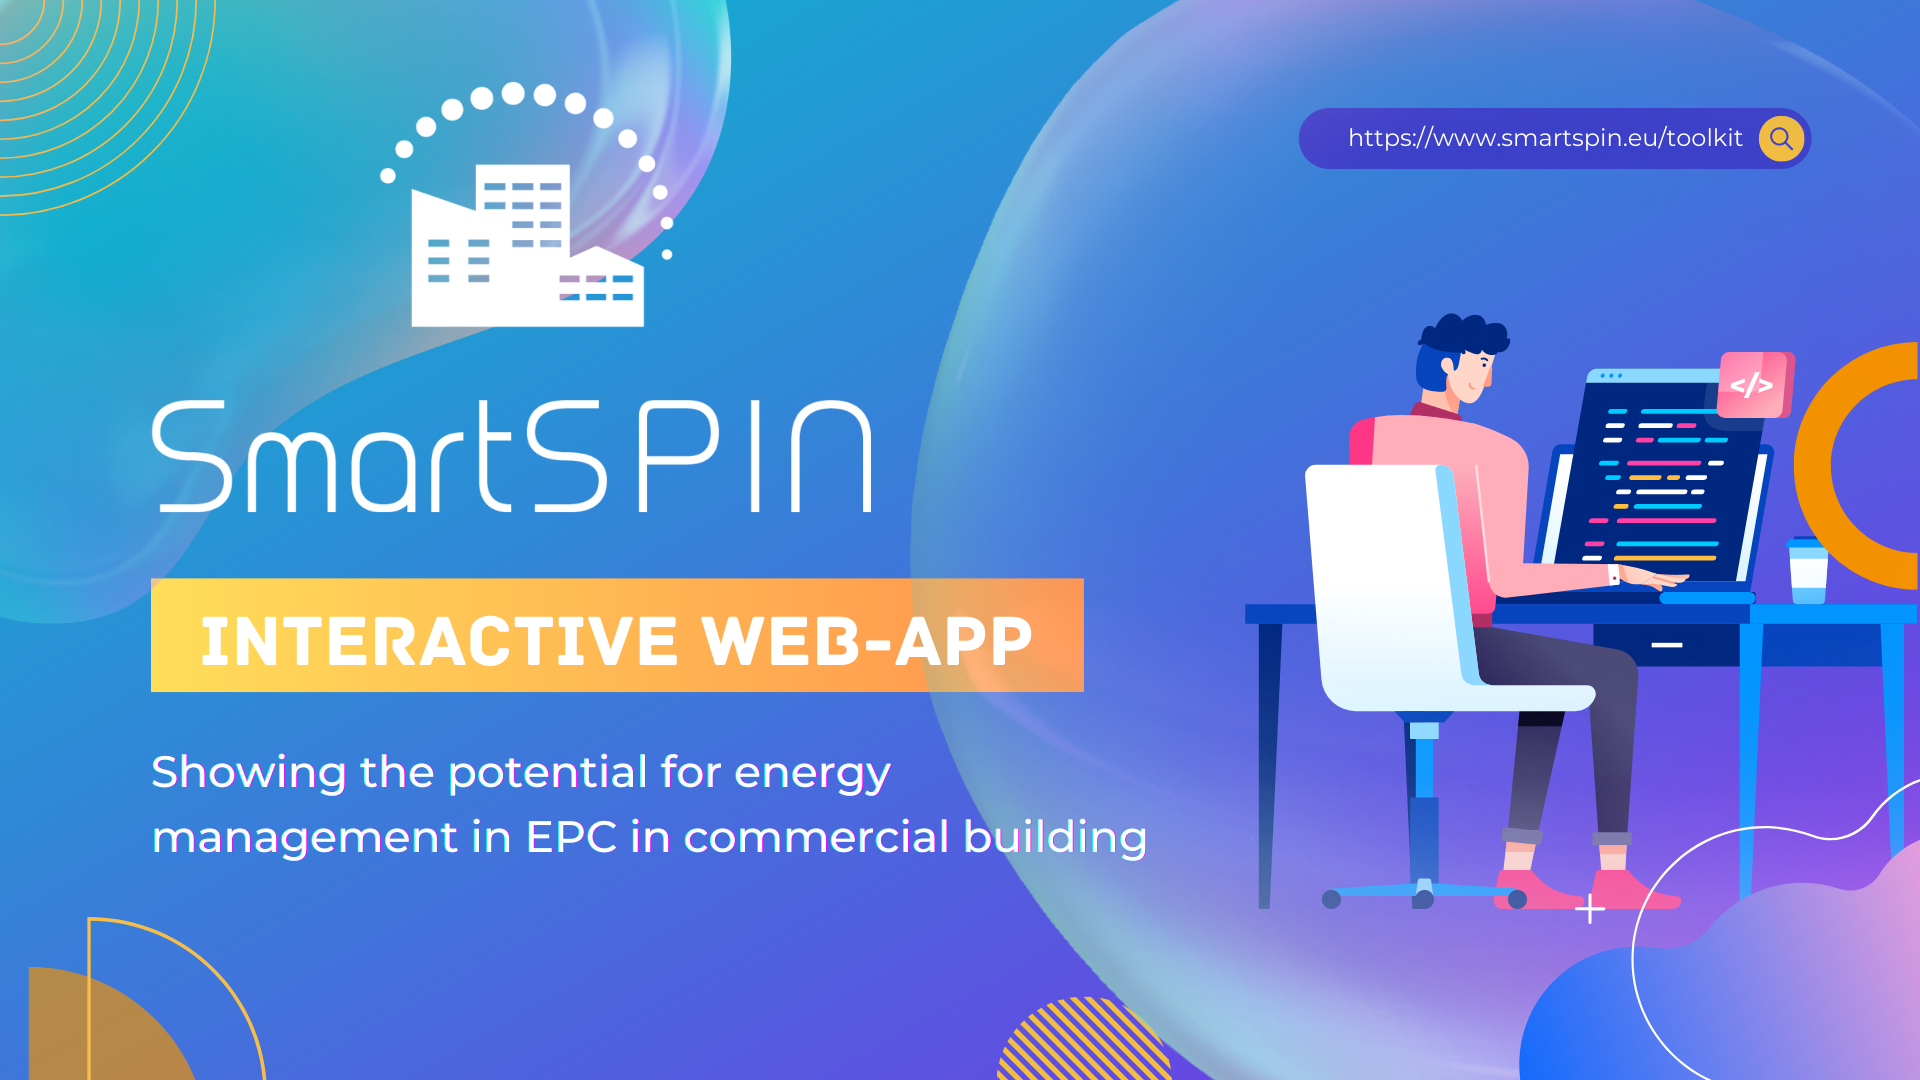 Smartspin App - Discover more